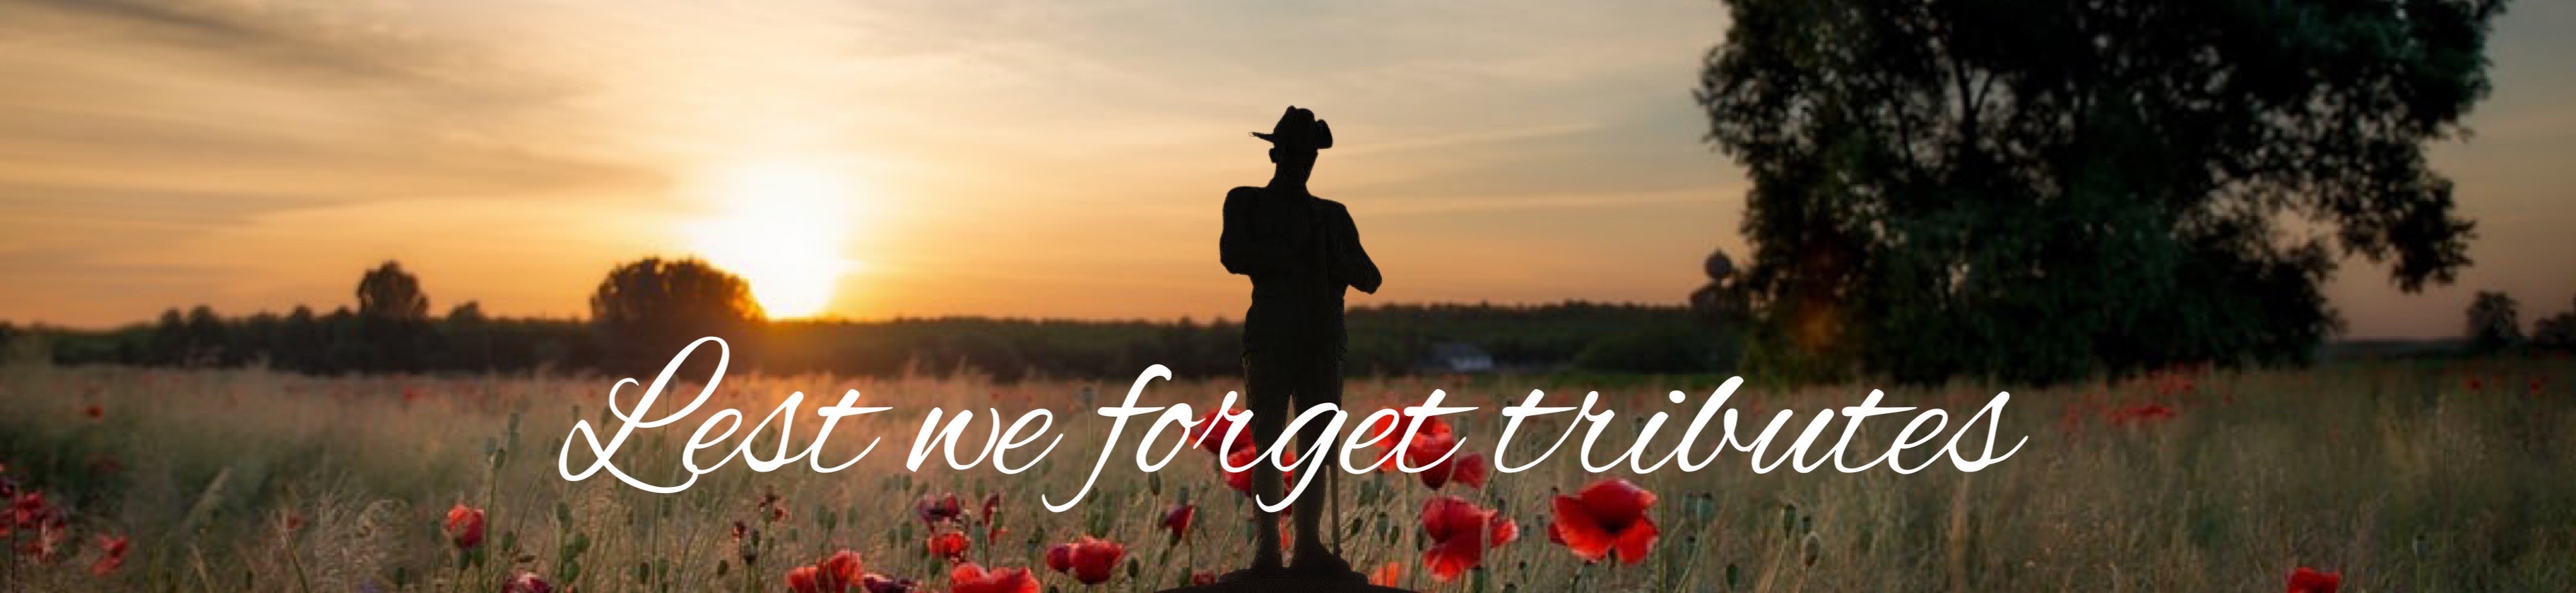 Remembrance tributes to pay homage to those we must always remember